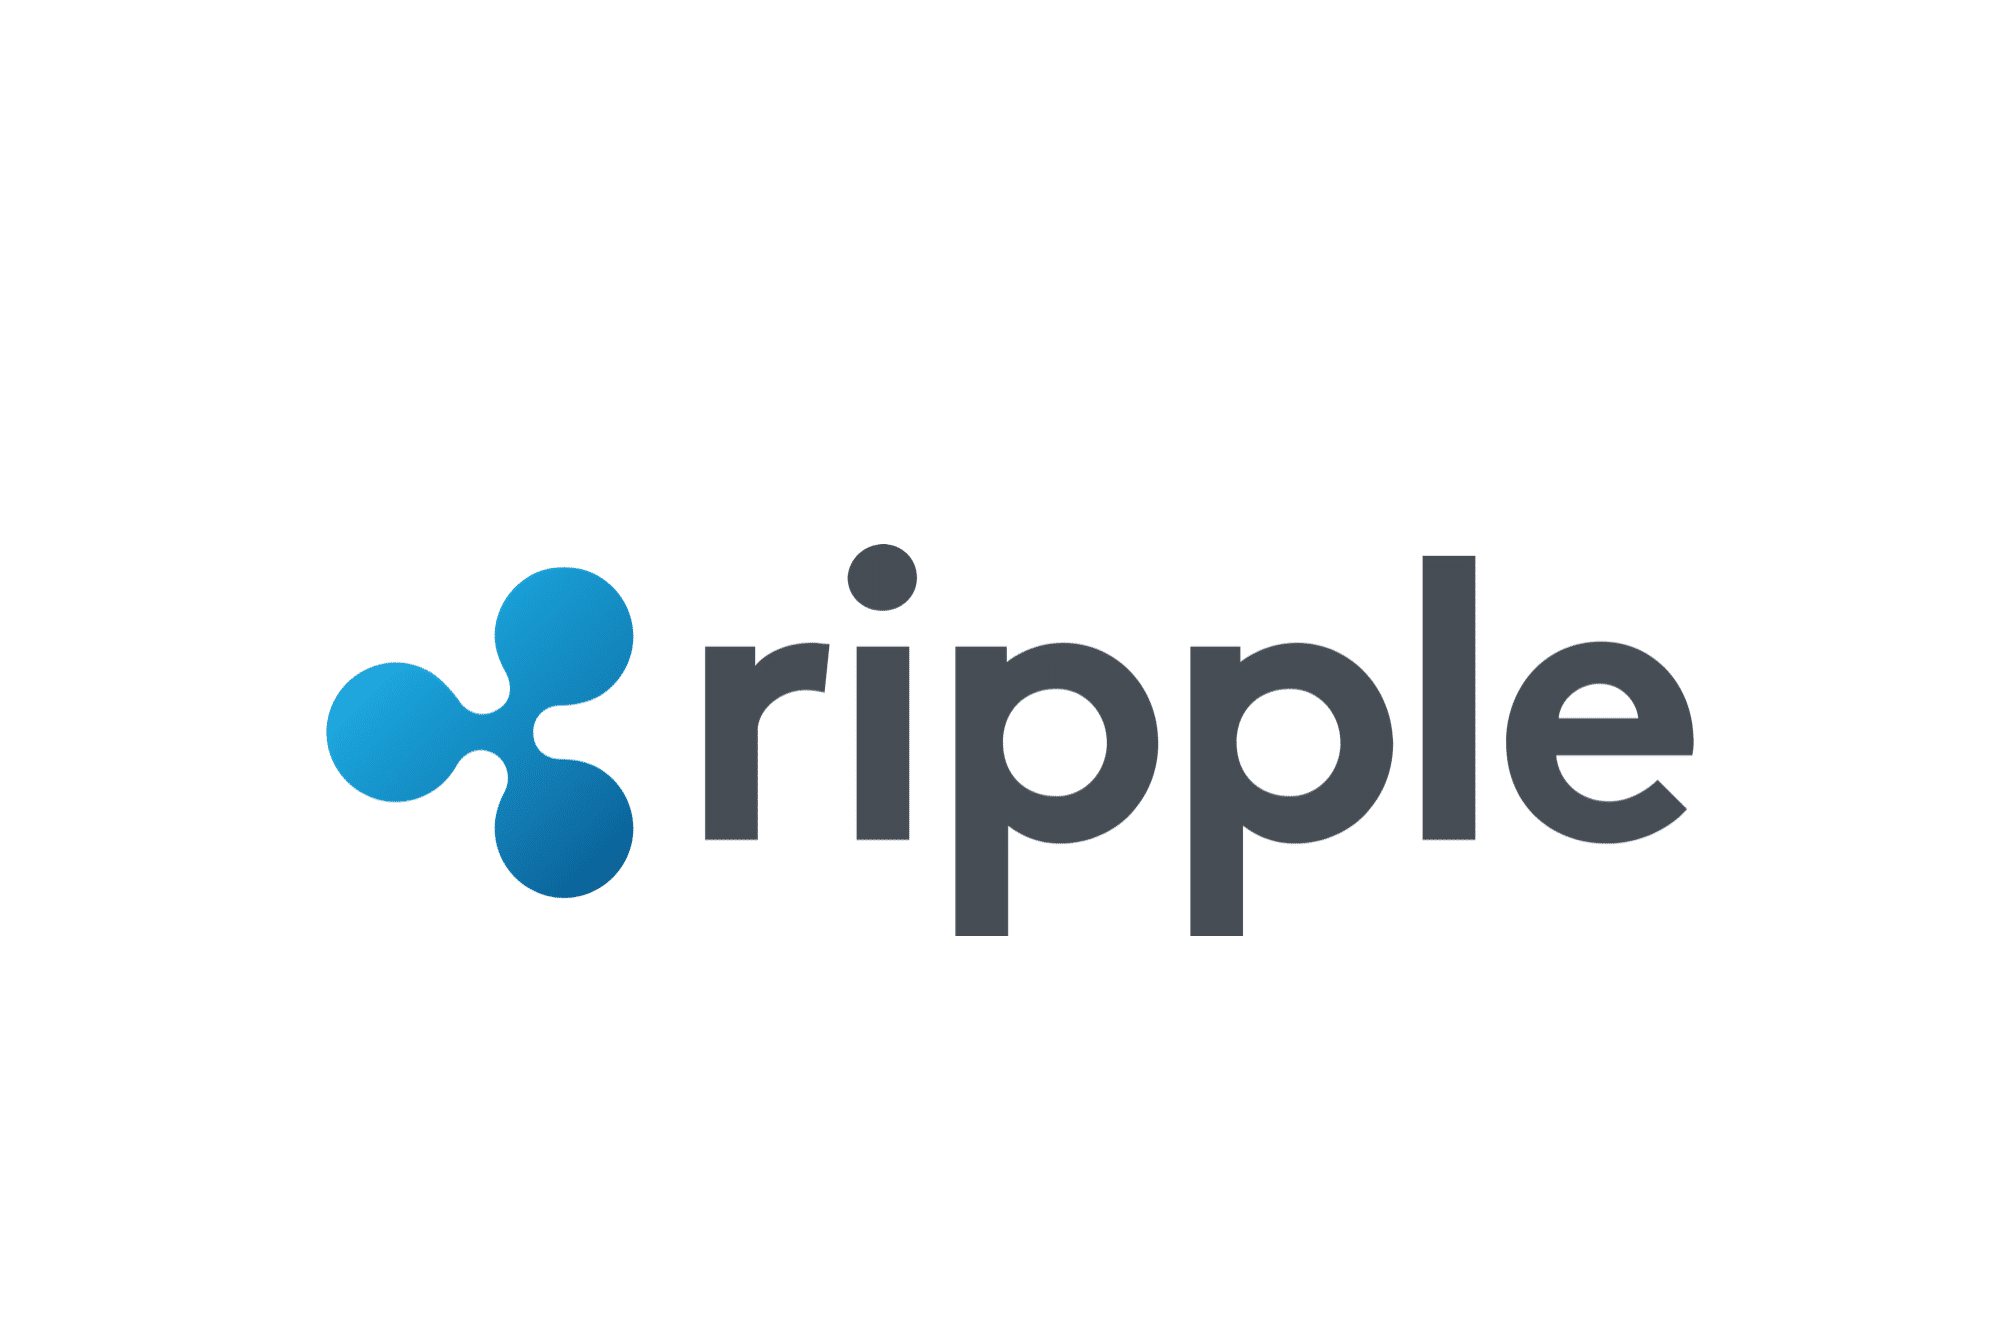 How to buy Ripple (XRP) in 3 Simple Steps